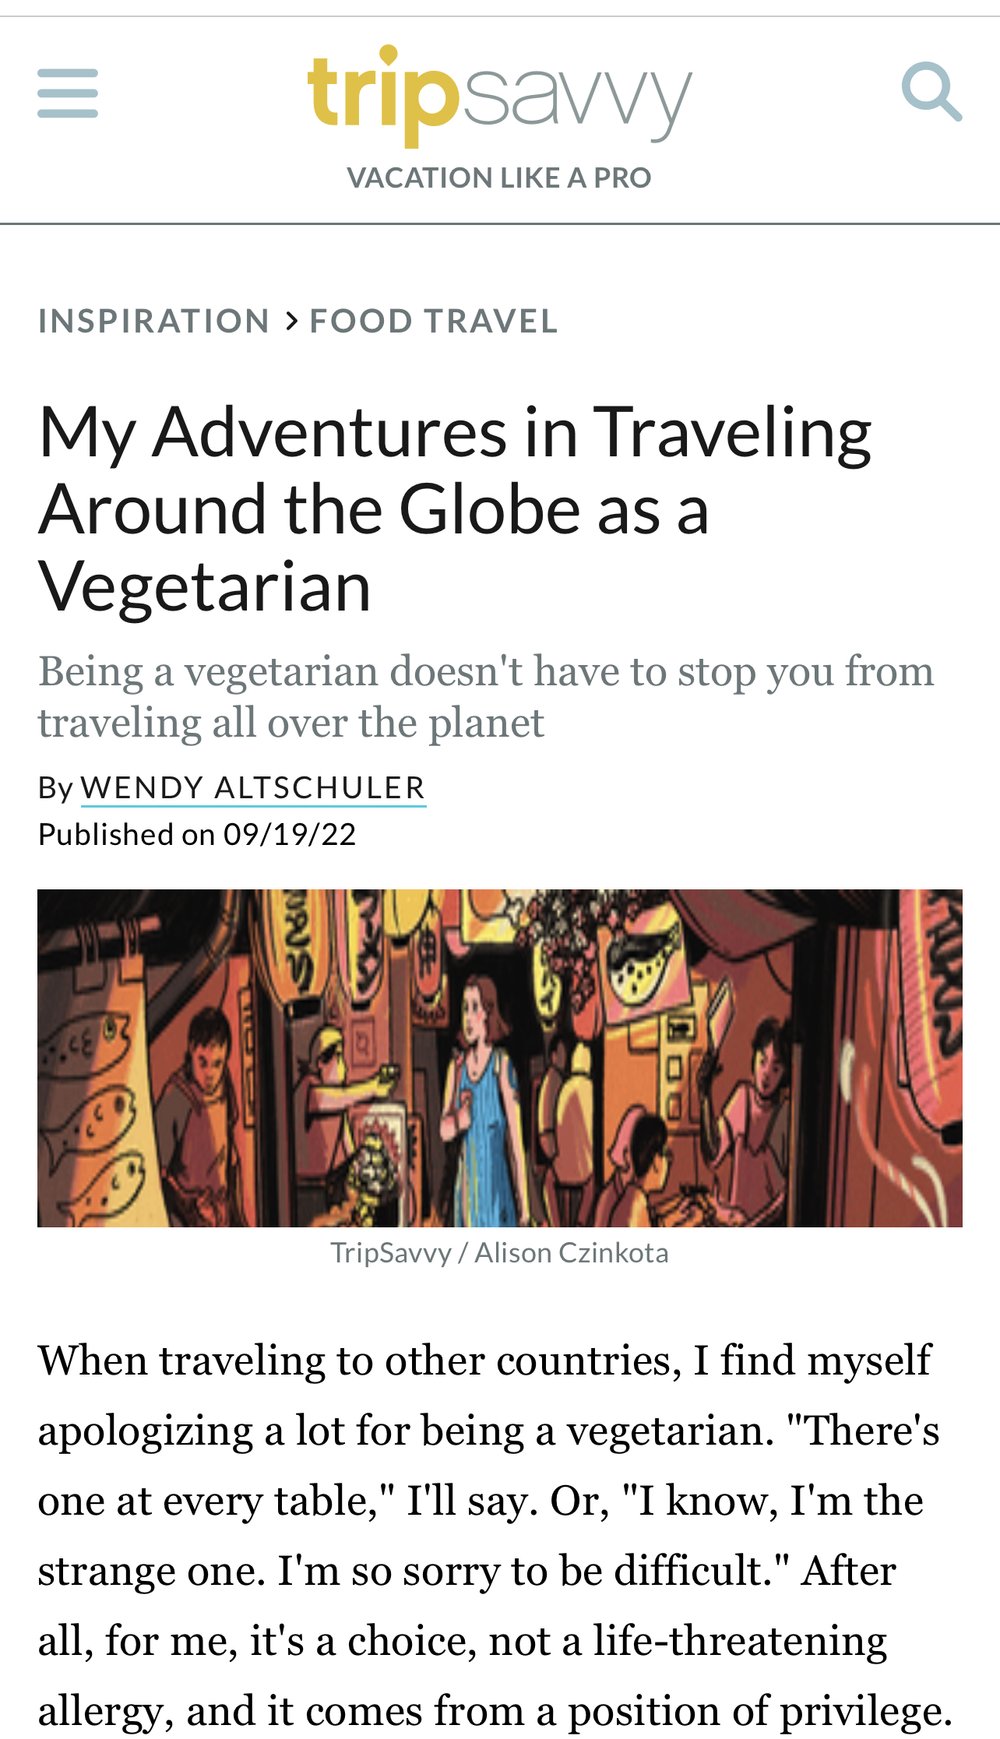 My Adventures in Traveling Around the Globe as a Vegetarian